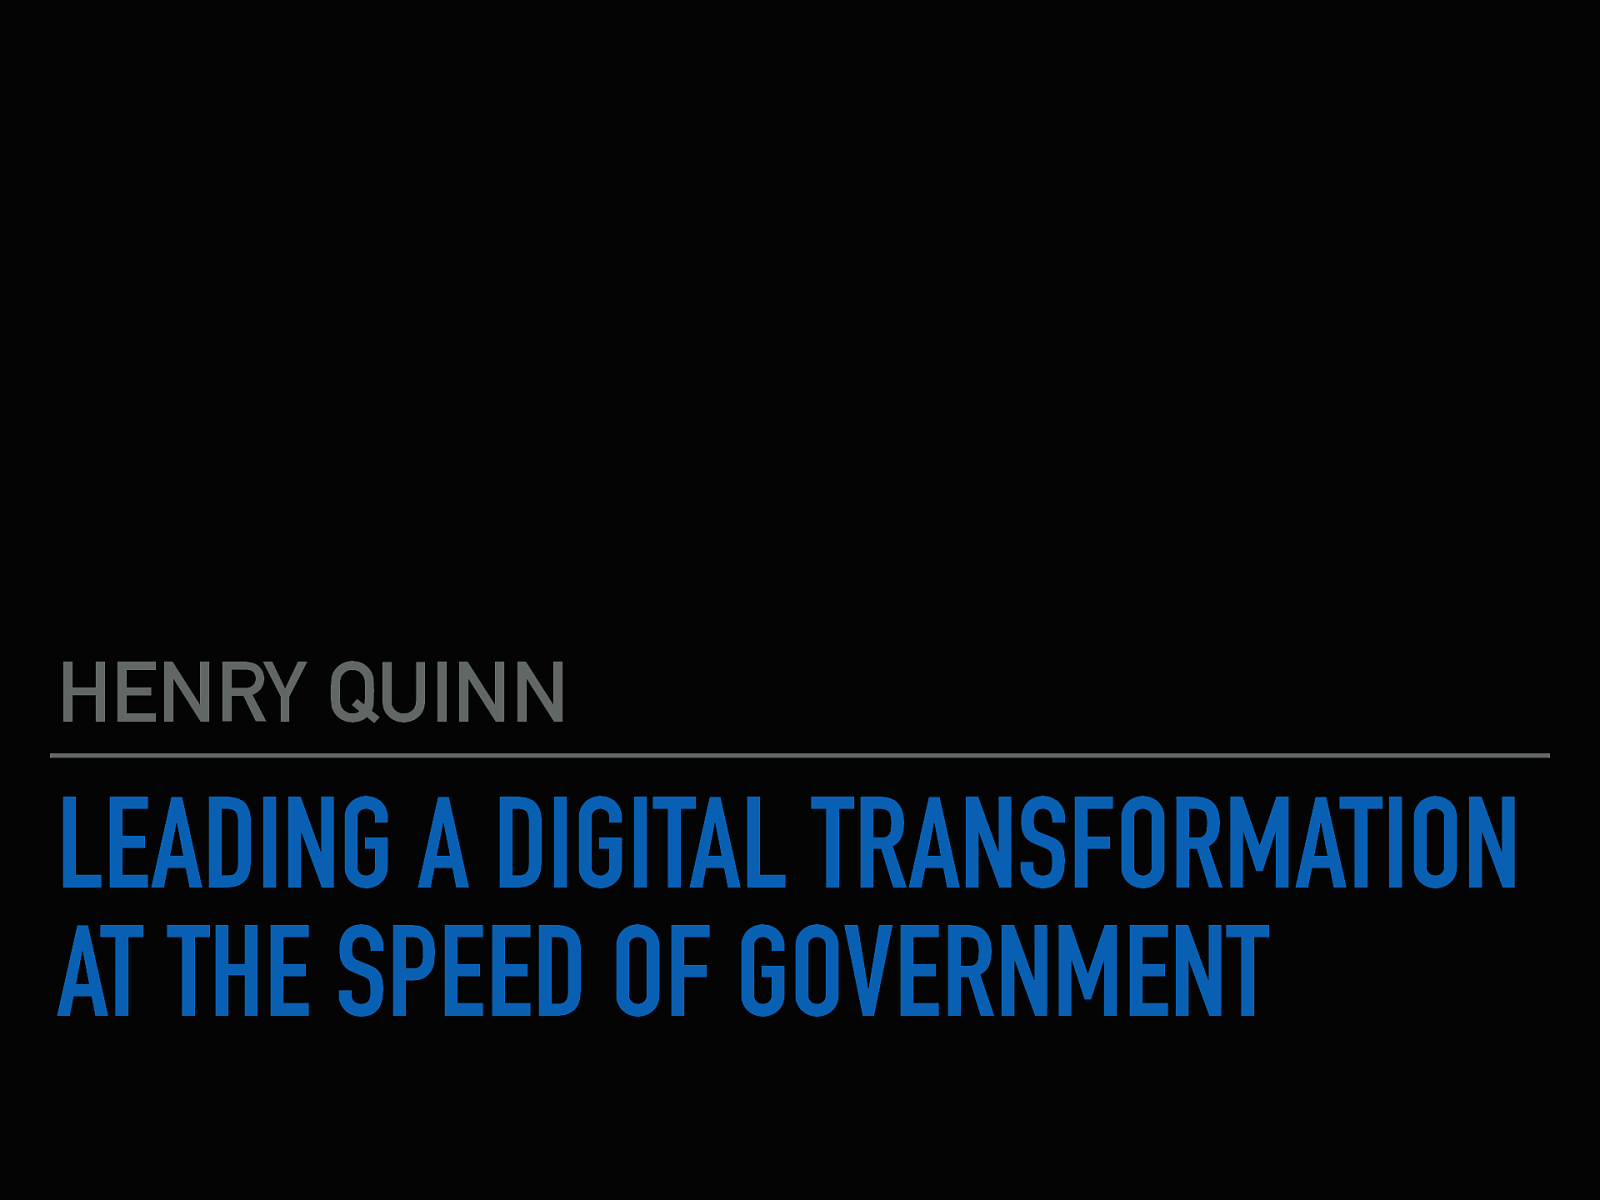 Leading a Digital Transformation at the Speed of Government